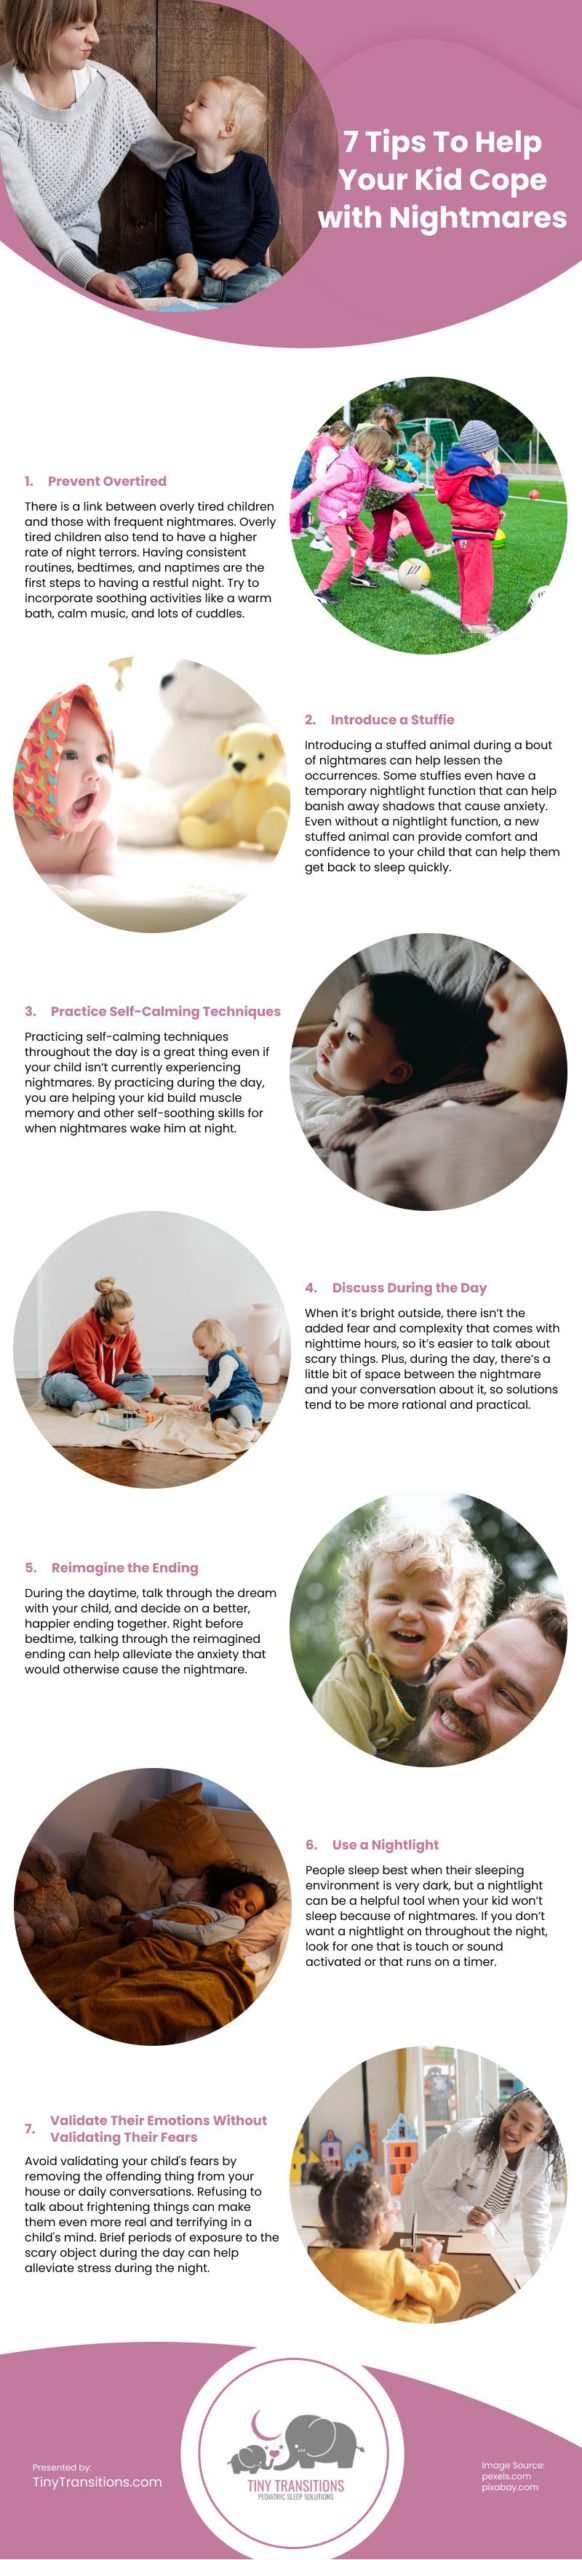 7 Tips to Help Your Kid Cope with Nightmares Infographic